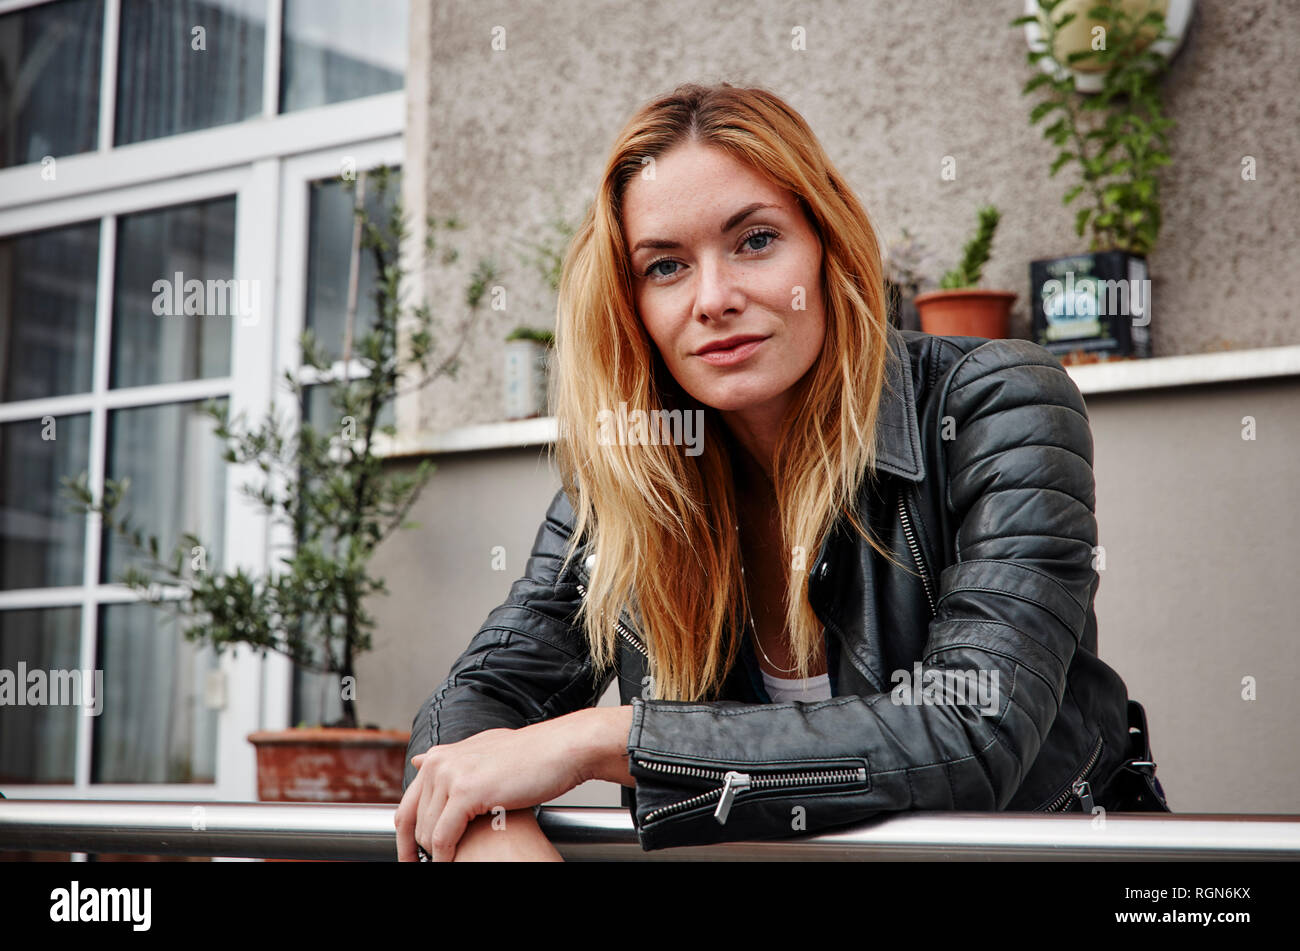 Portrait of young woman wearing biker jacket leaning on railing balcon Banque D'Images